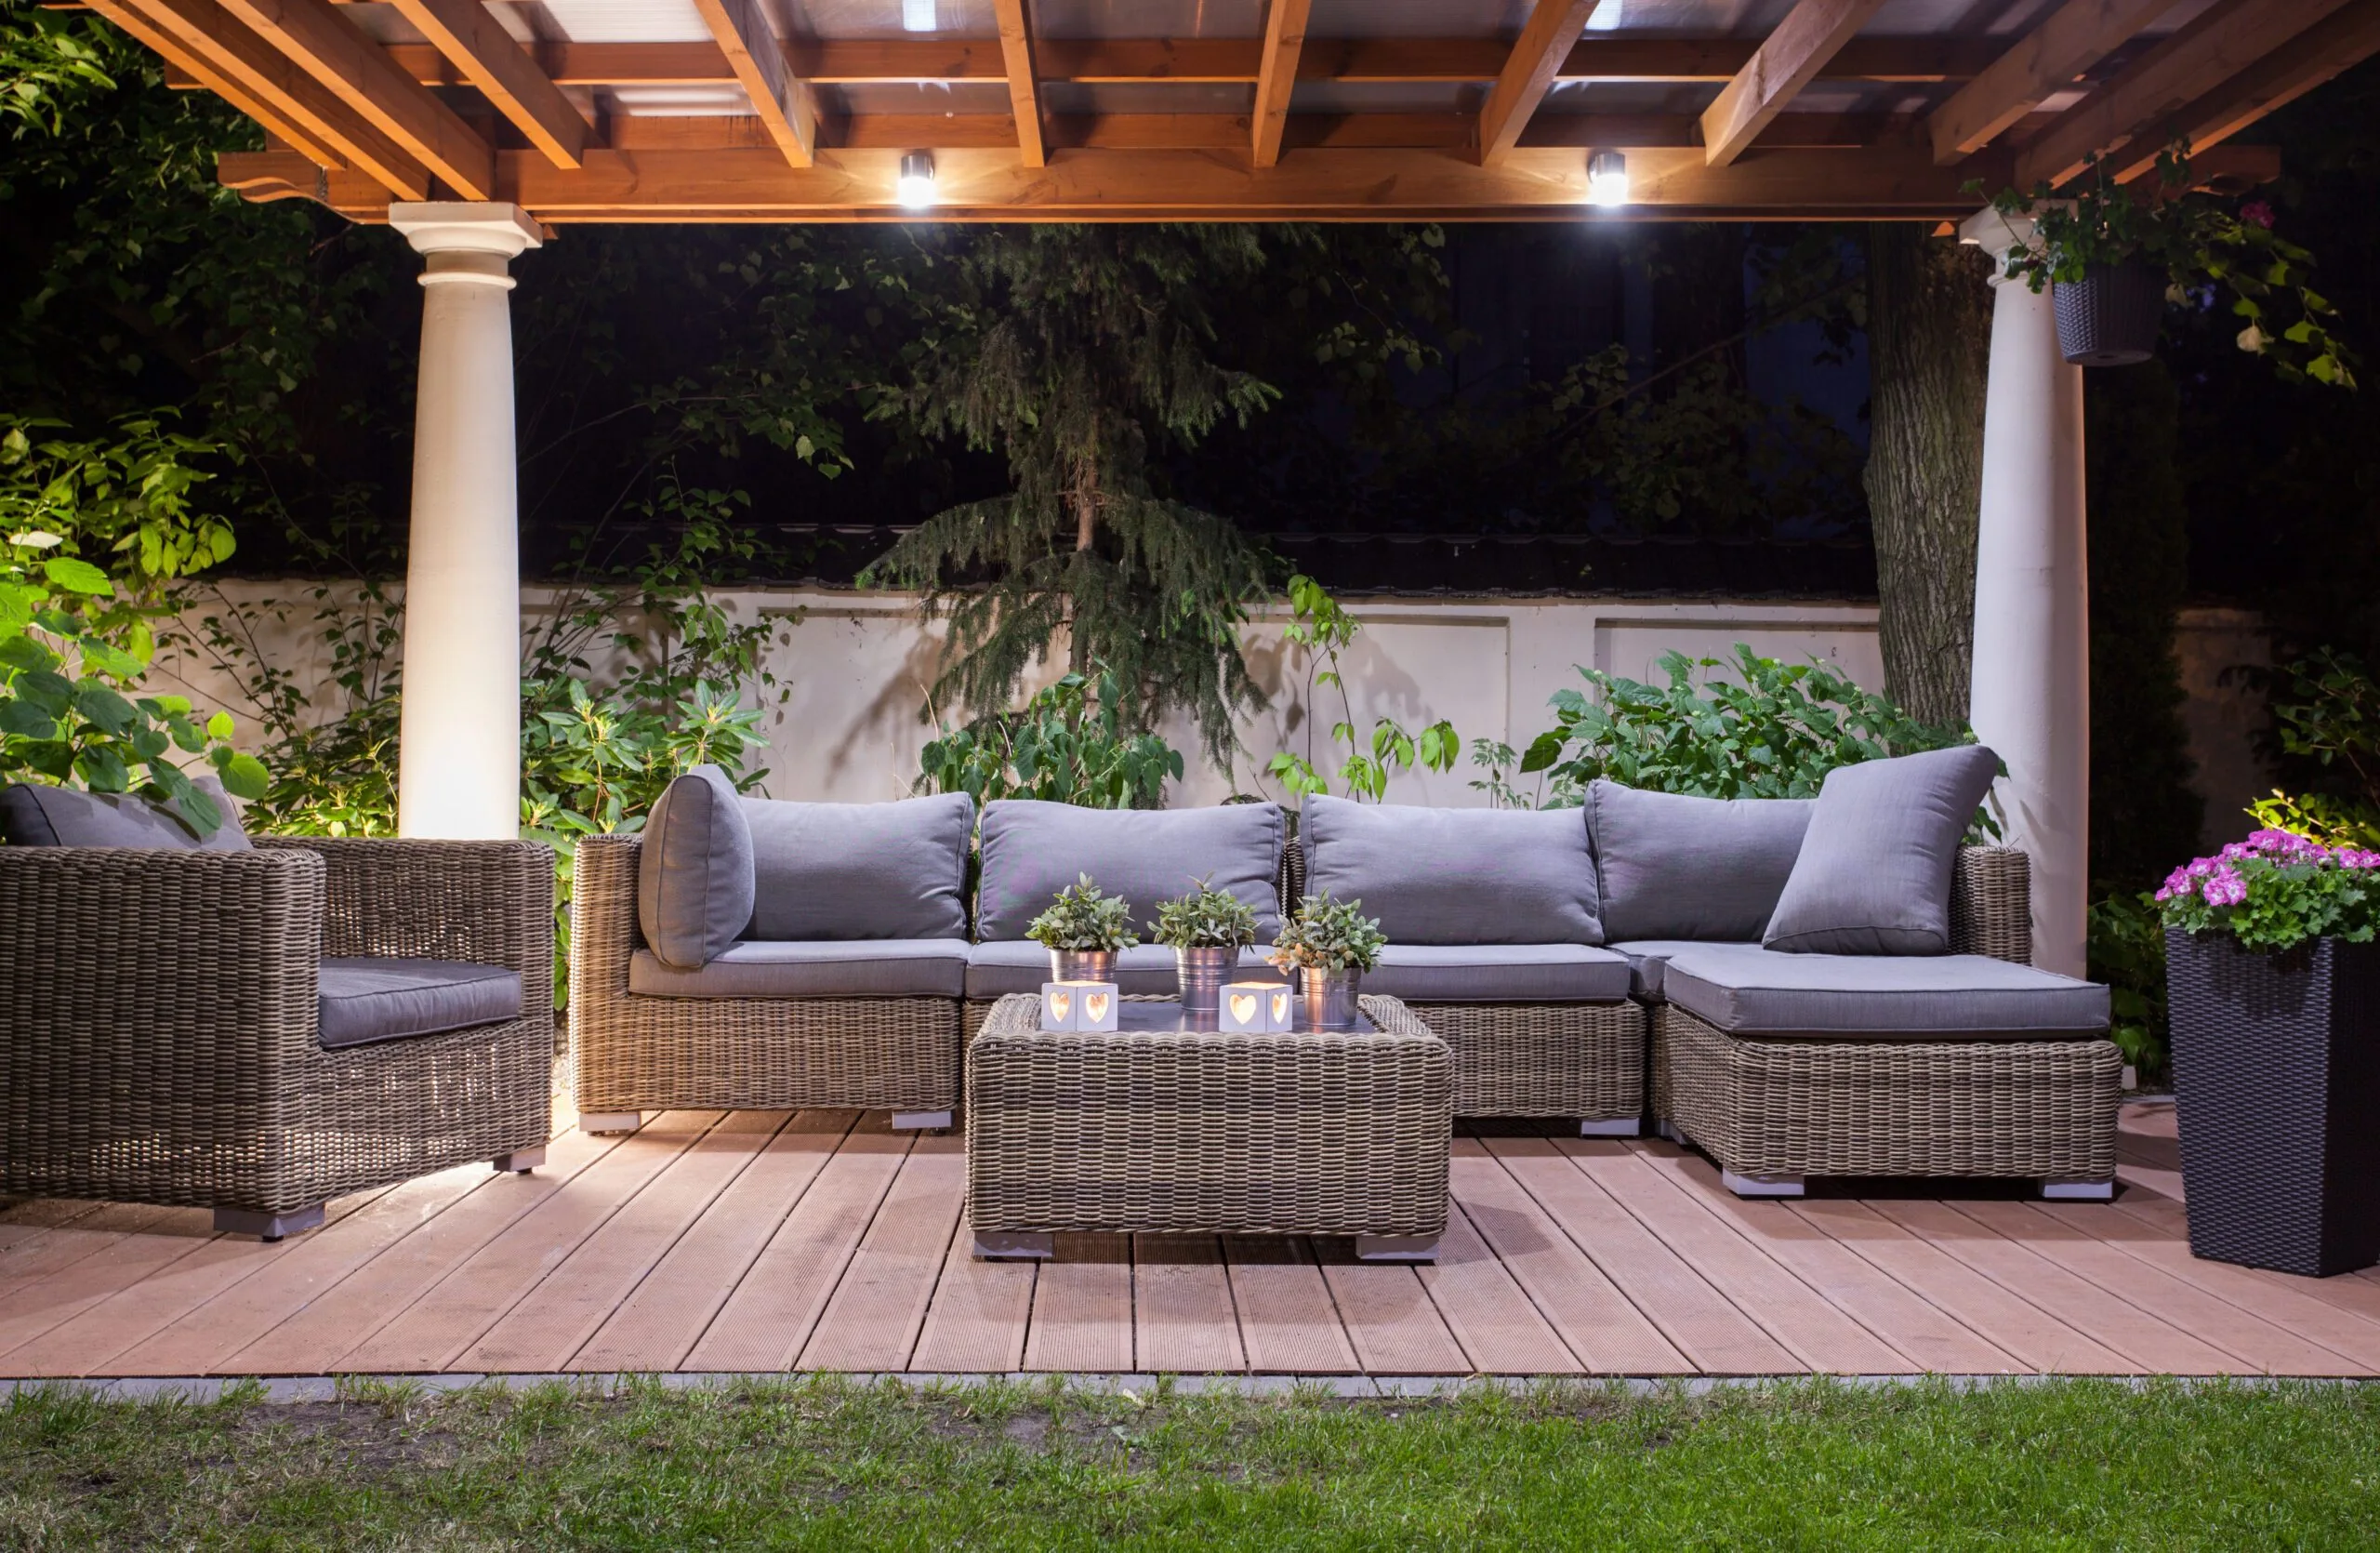 Residential backyard with outdoor furniture and canopy with lights.